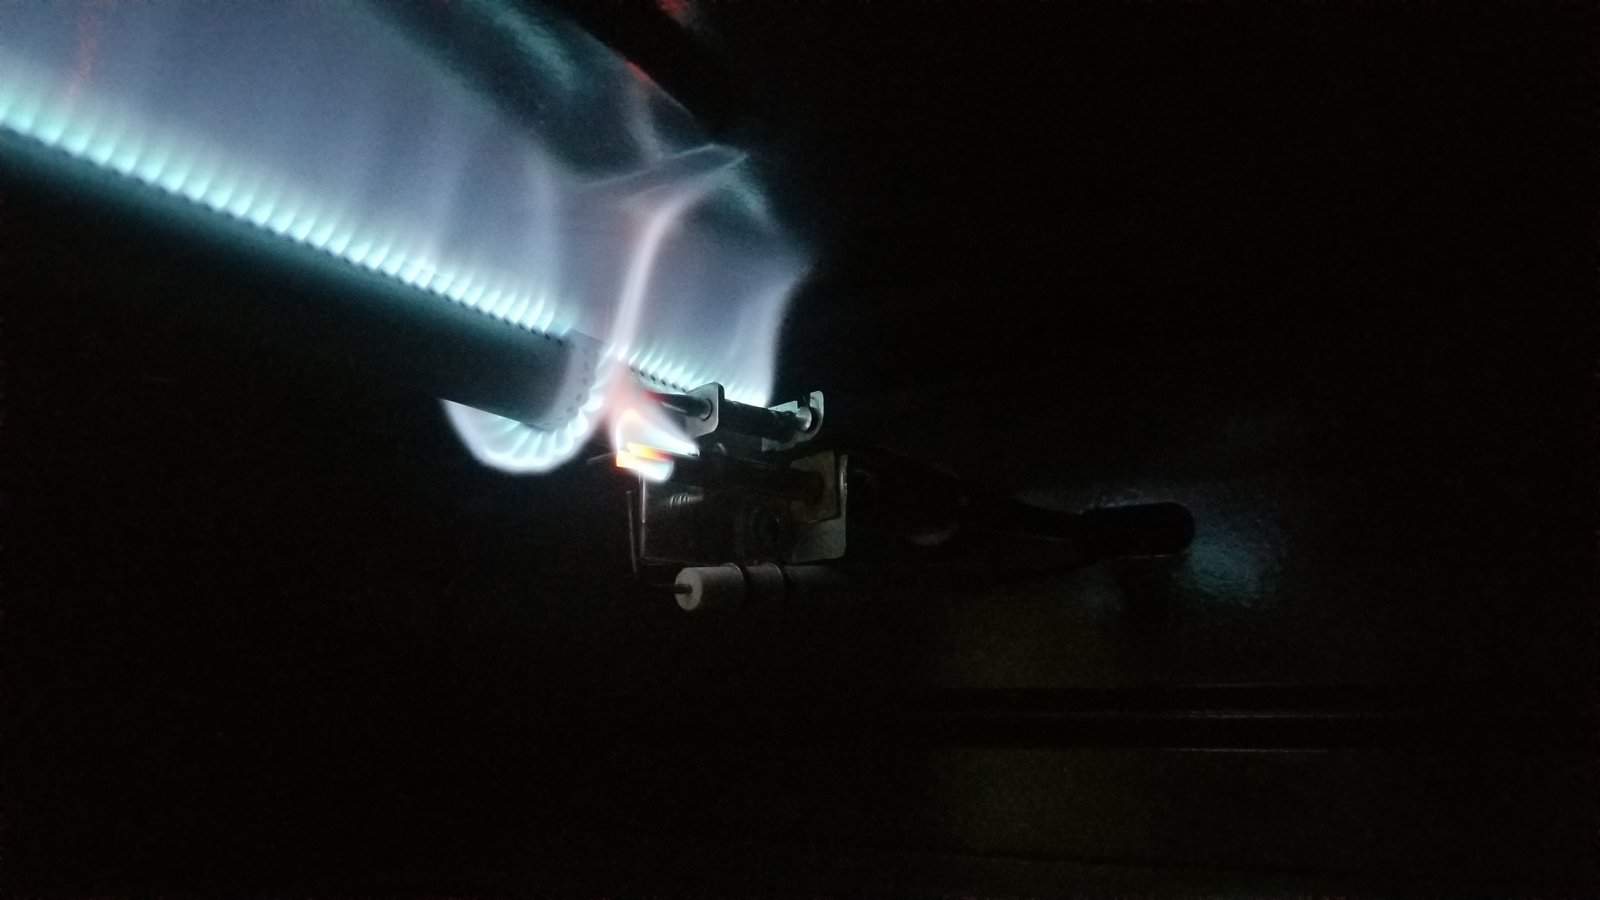 RV oven gas manifold makes baking tricky. (Image: @AlexP, iRV2 Forums member)